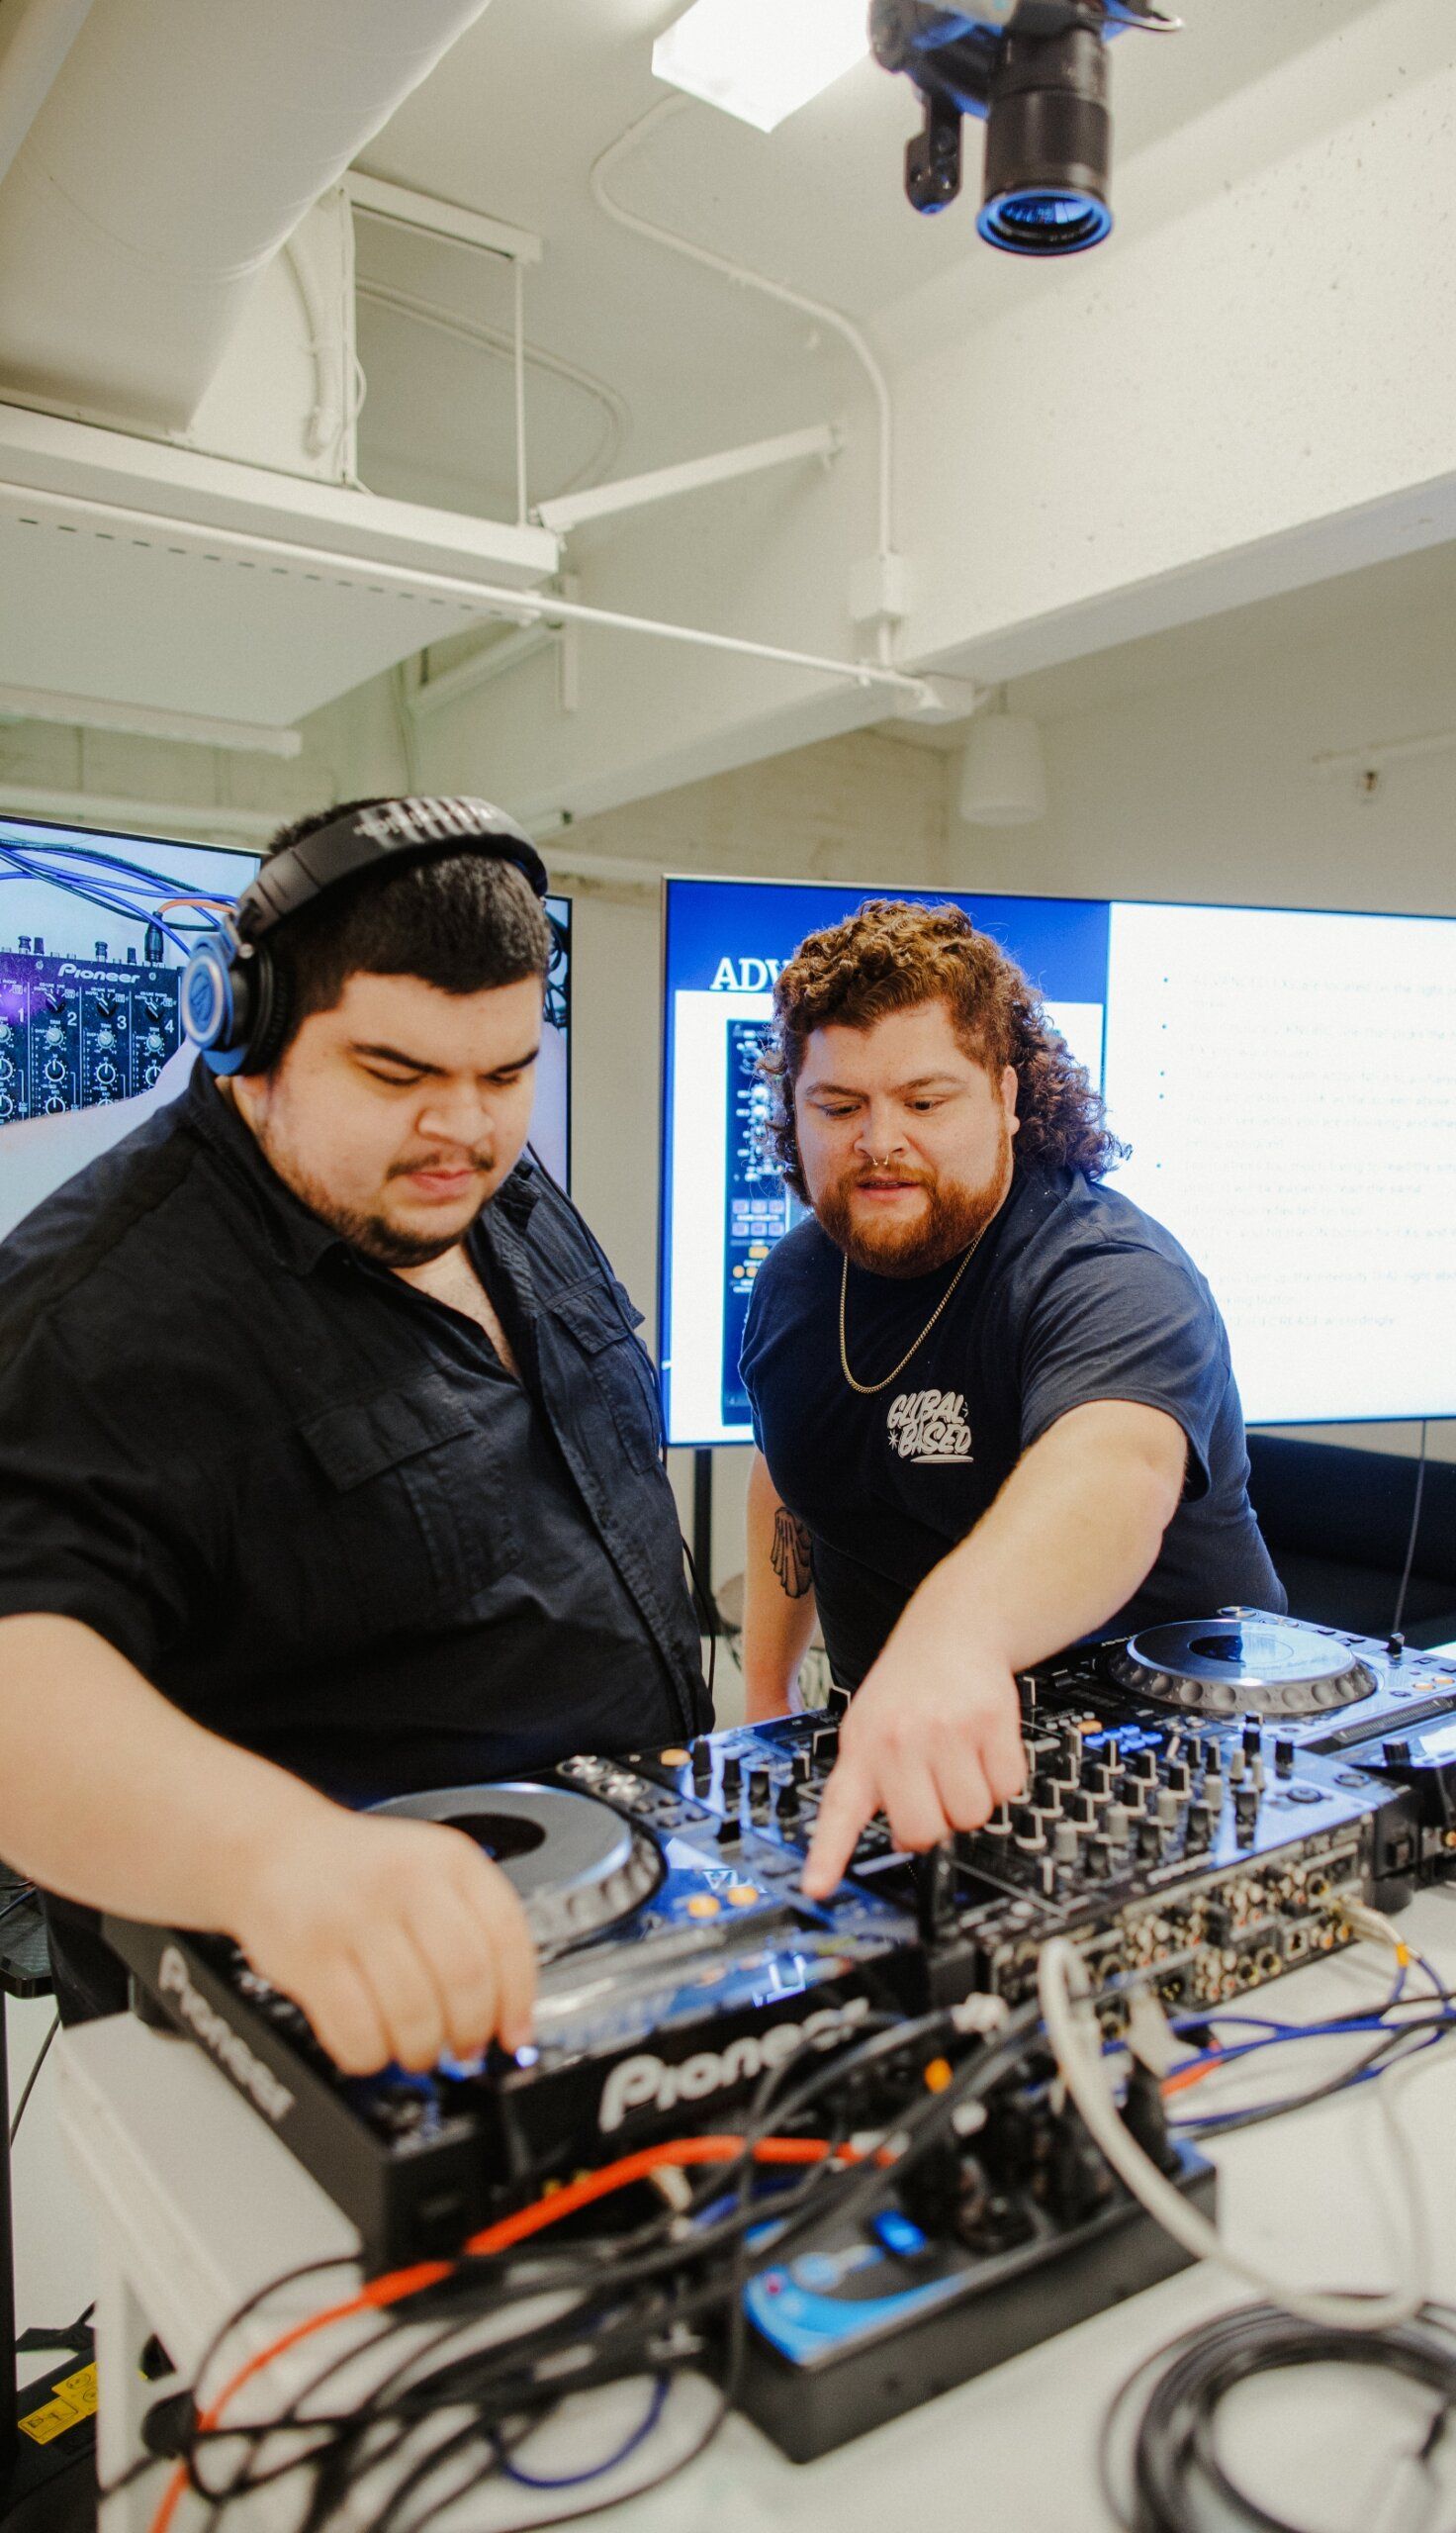 Two men operate DJ equipment, with one wearing headphones and the other pointing at a control panel. They are in an indoor setting with a screen displaying text in the background.